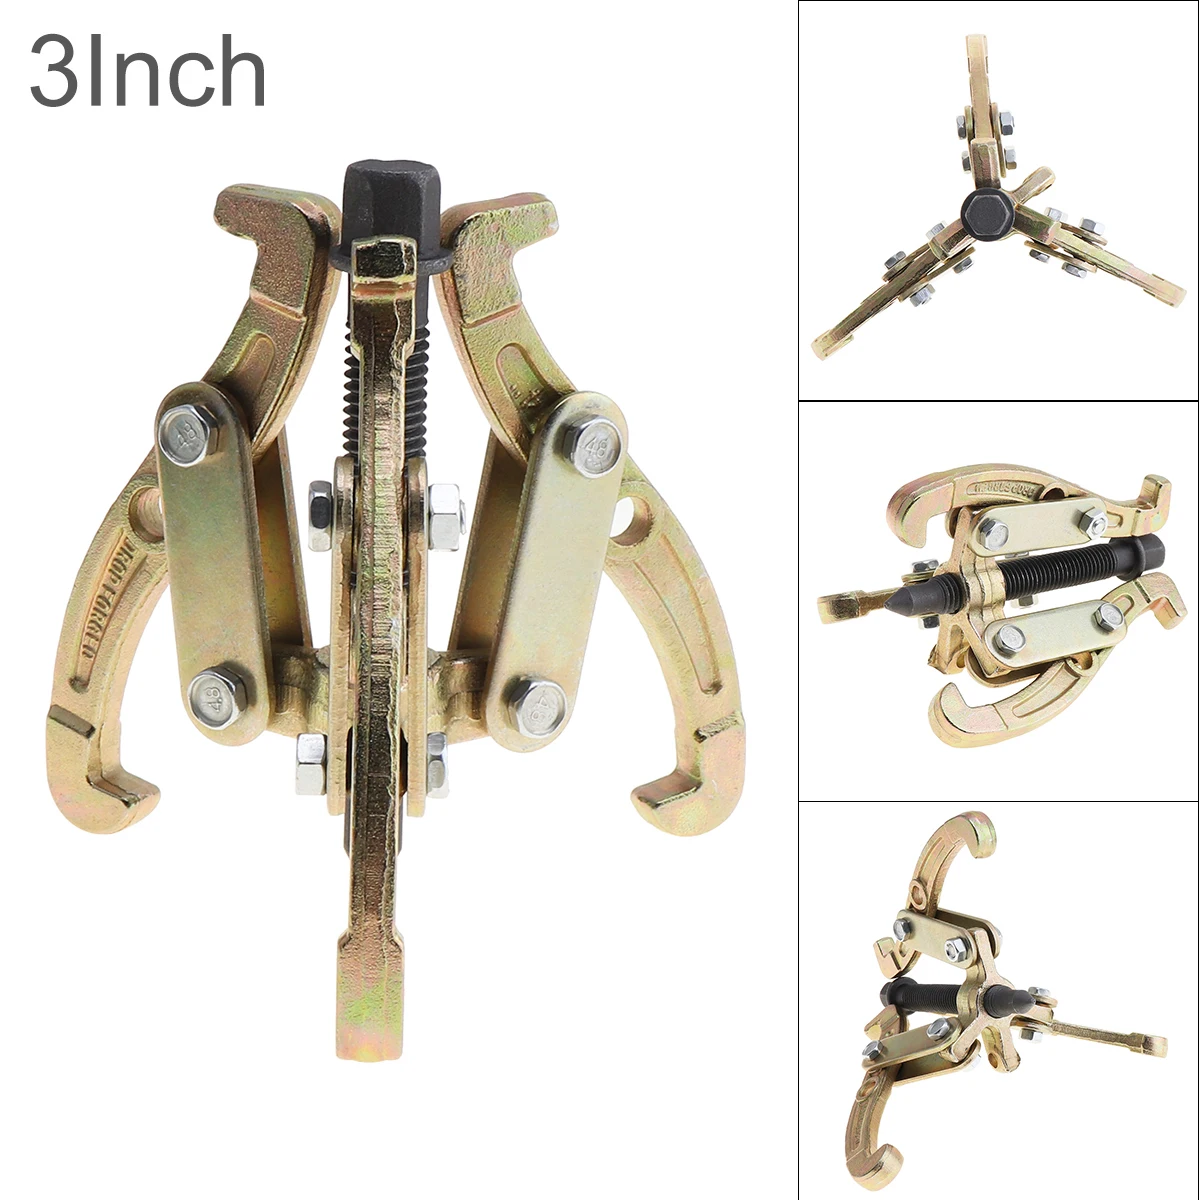 45# Steel 2 Claws / 3 Claws Bearing Puller Multi-purpose Rama with 4 Single Hole Claw Pullers for  Car / Mechanical Repairing